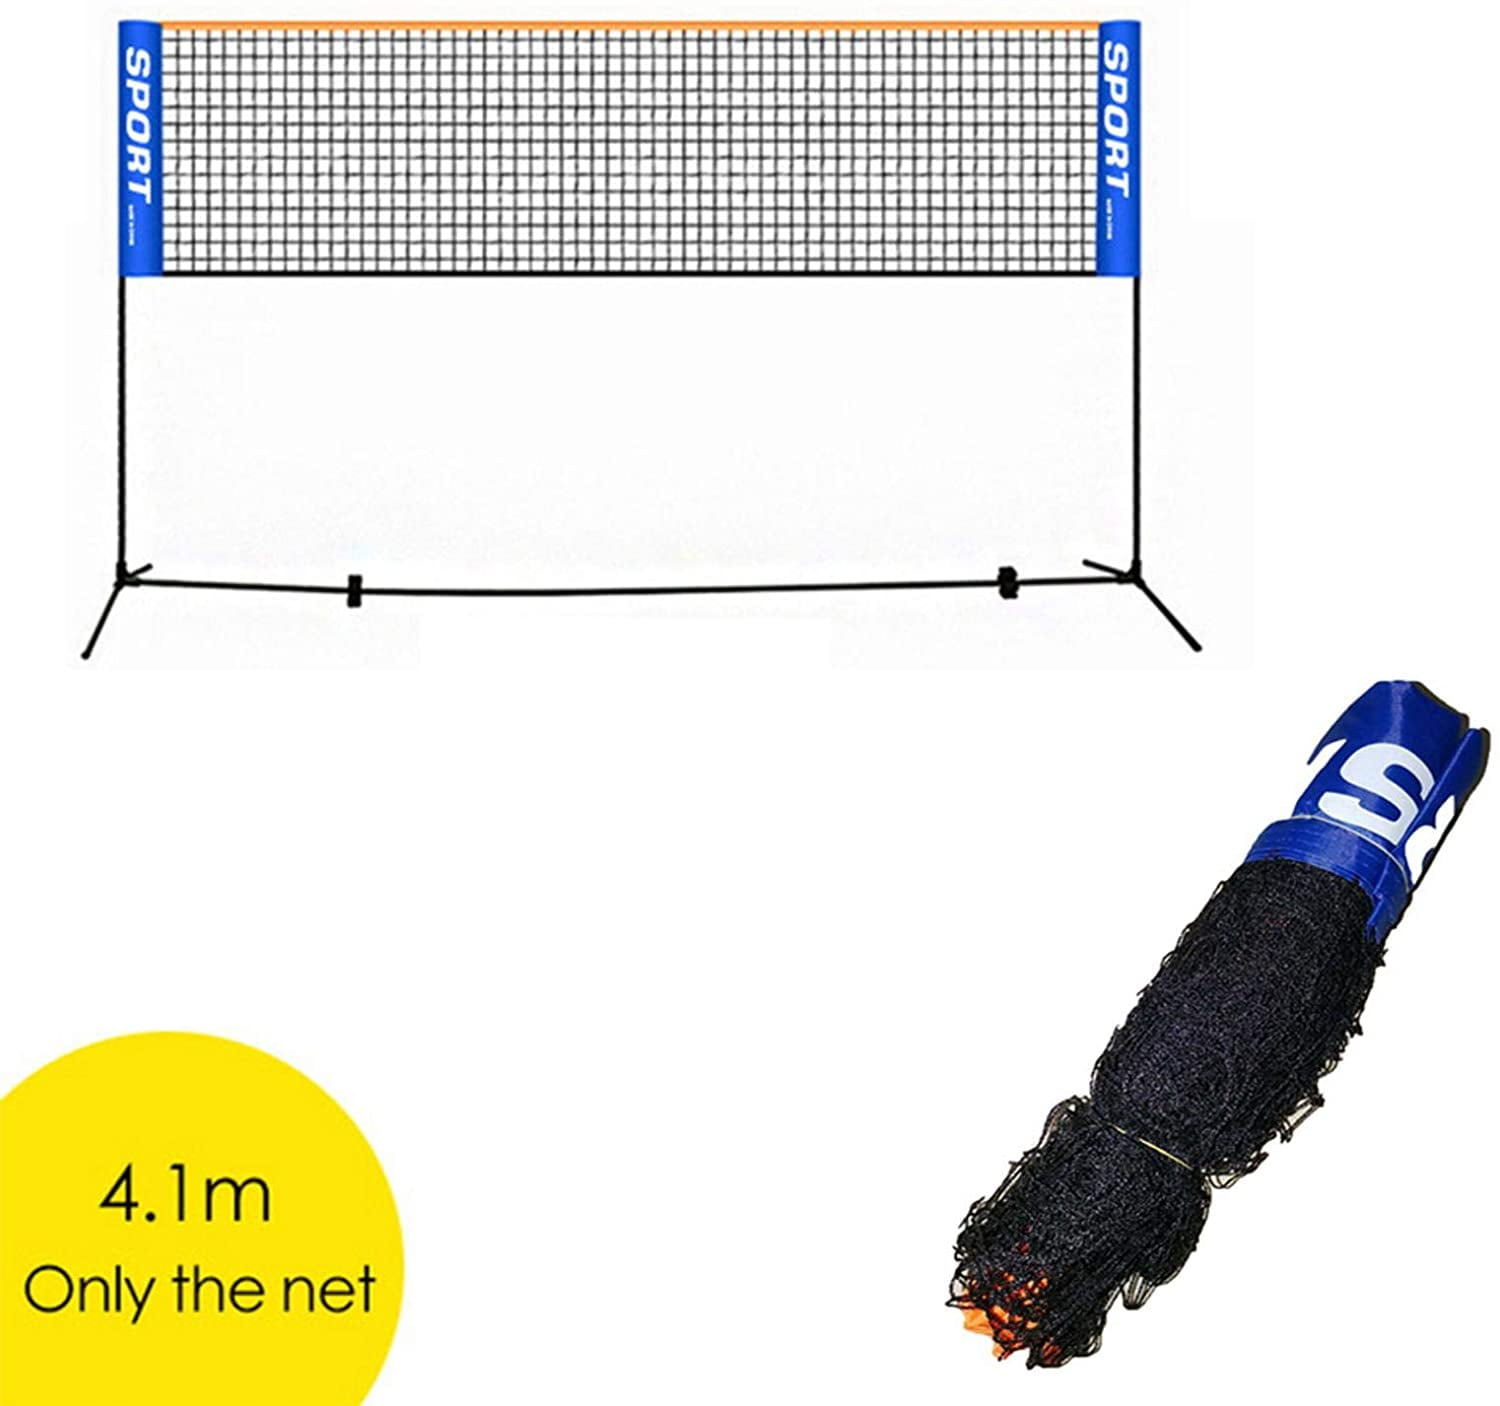 Durable Nylon Mesh Net Replacement Portable for Badminton Tennis Pickleball Volleyball Training Indoor Outdoor Yard Sports